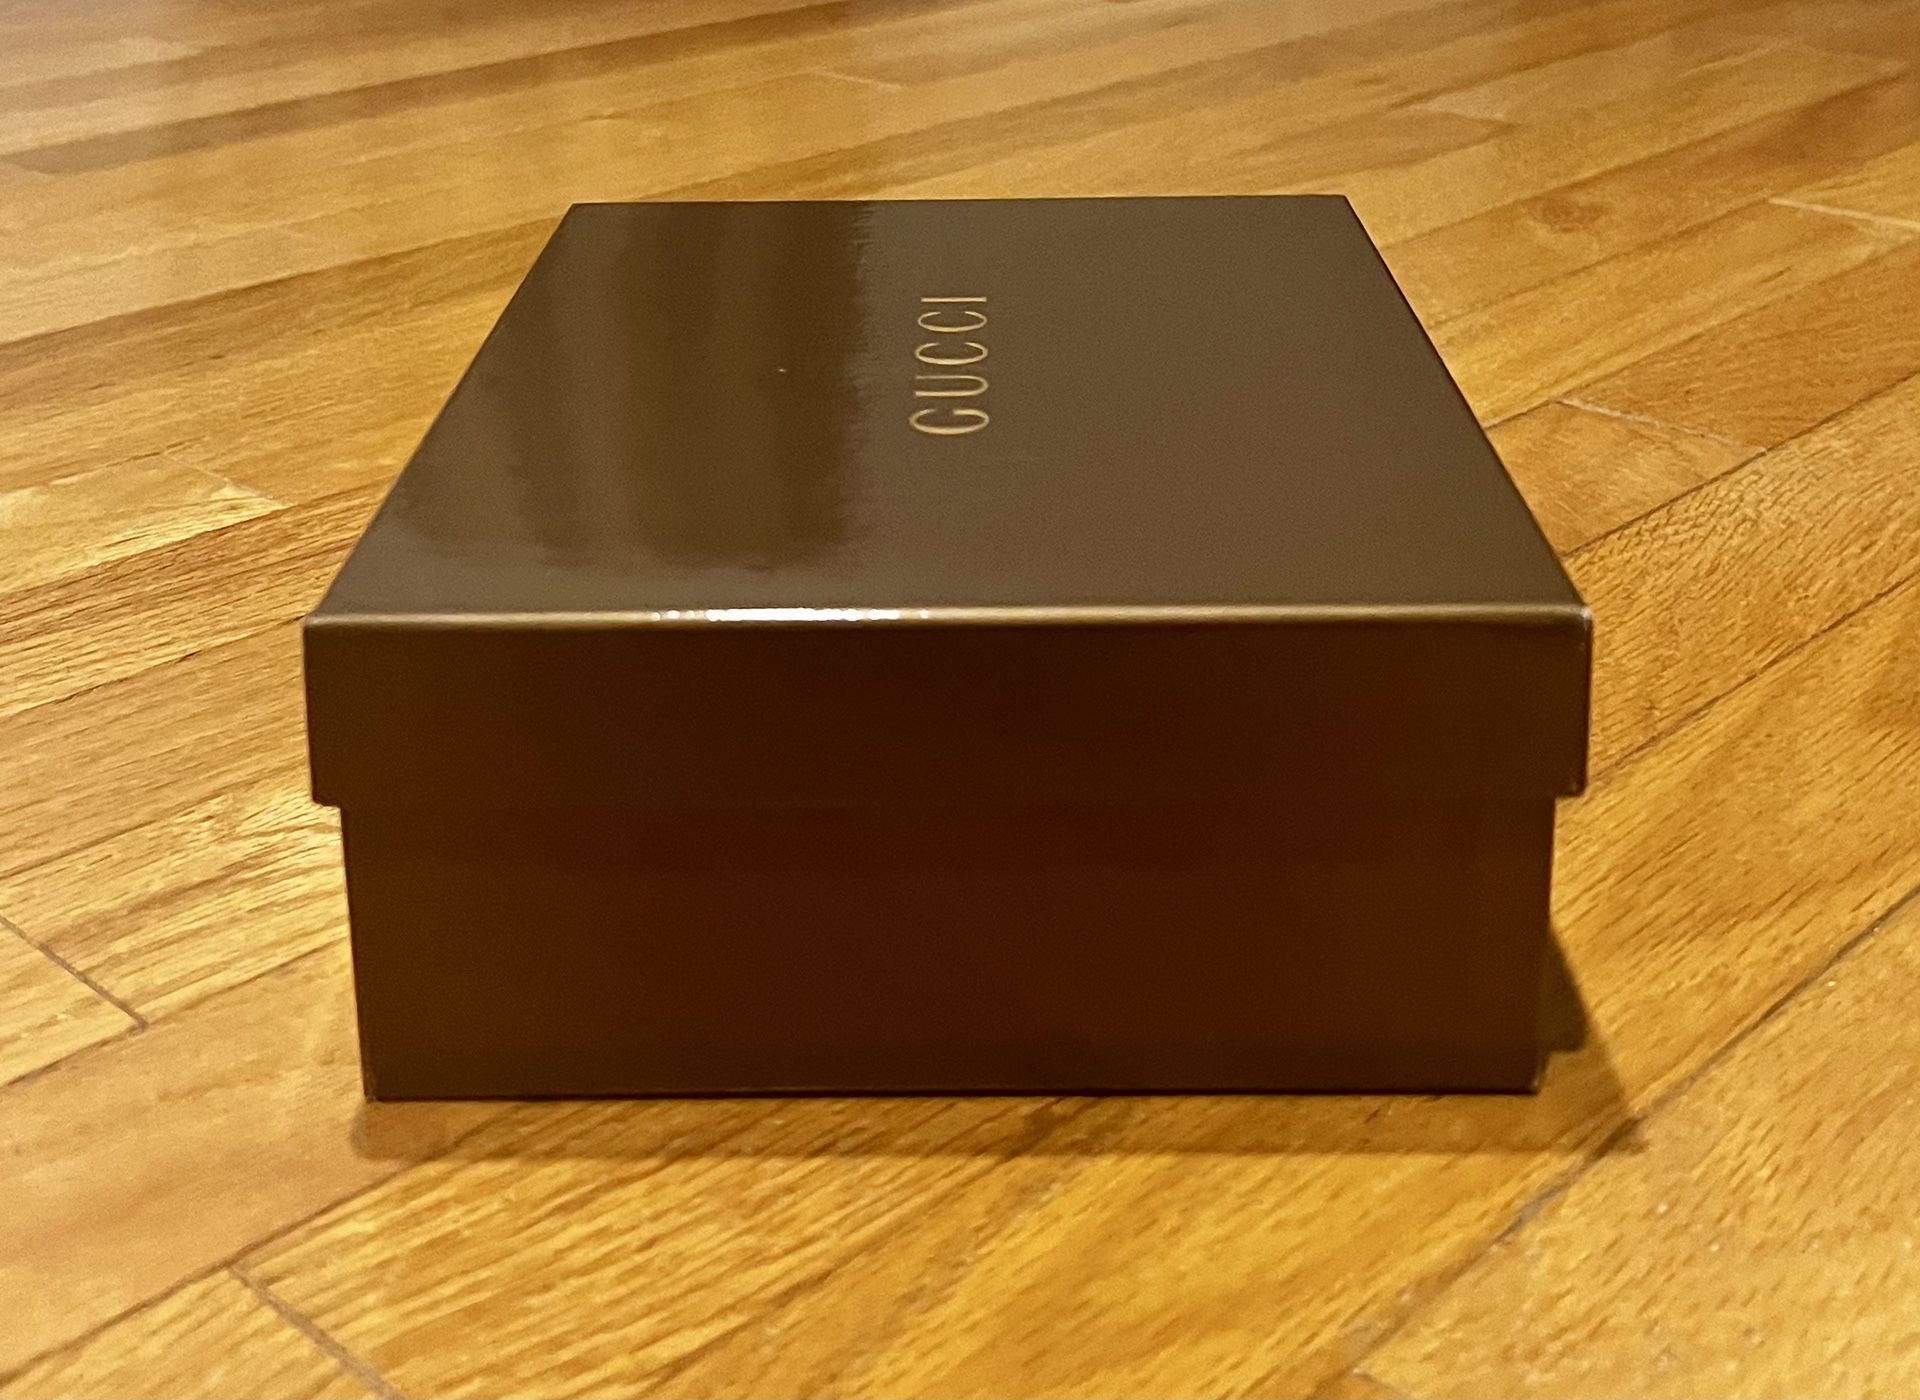 Gucci Gift Or Storage Box With Bag And Tissue Paper And Cloth for Sale in  Alexandria, VA - OfferUp